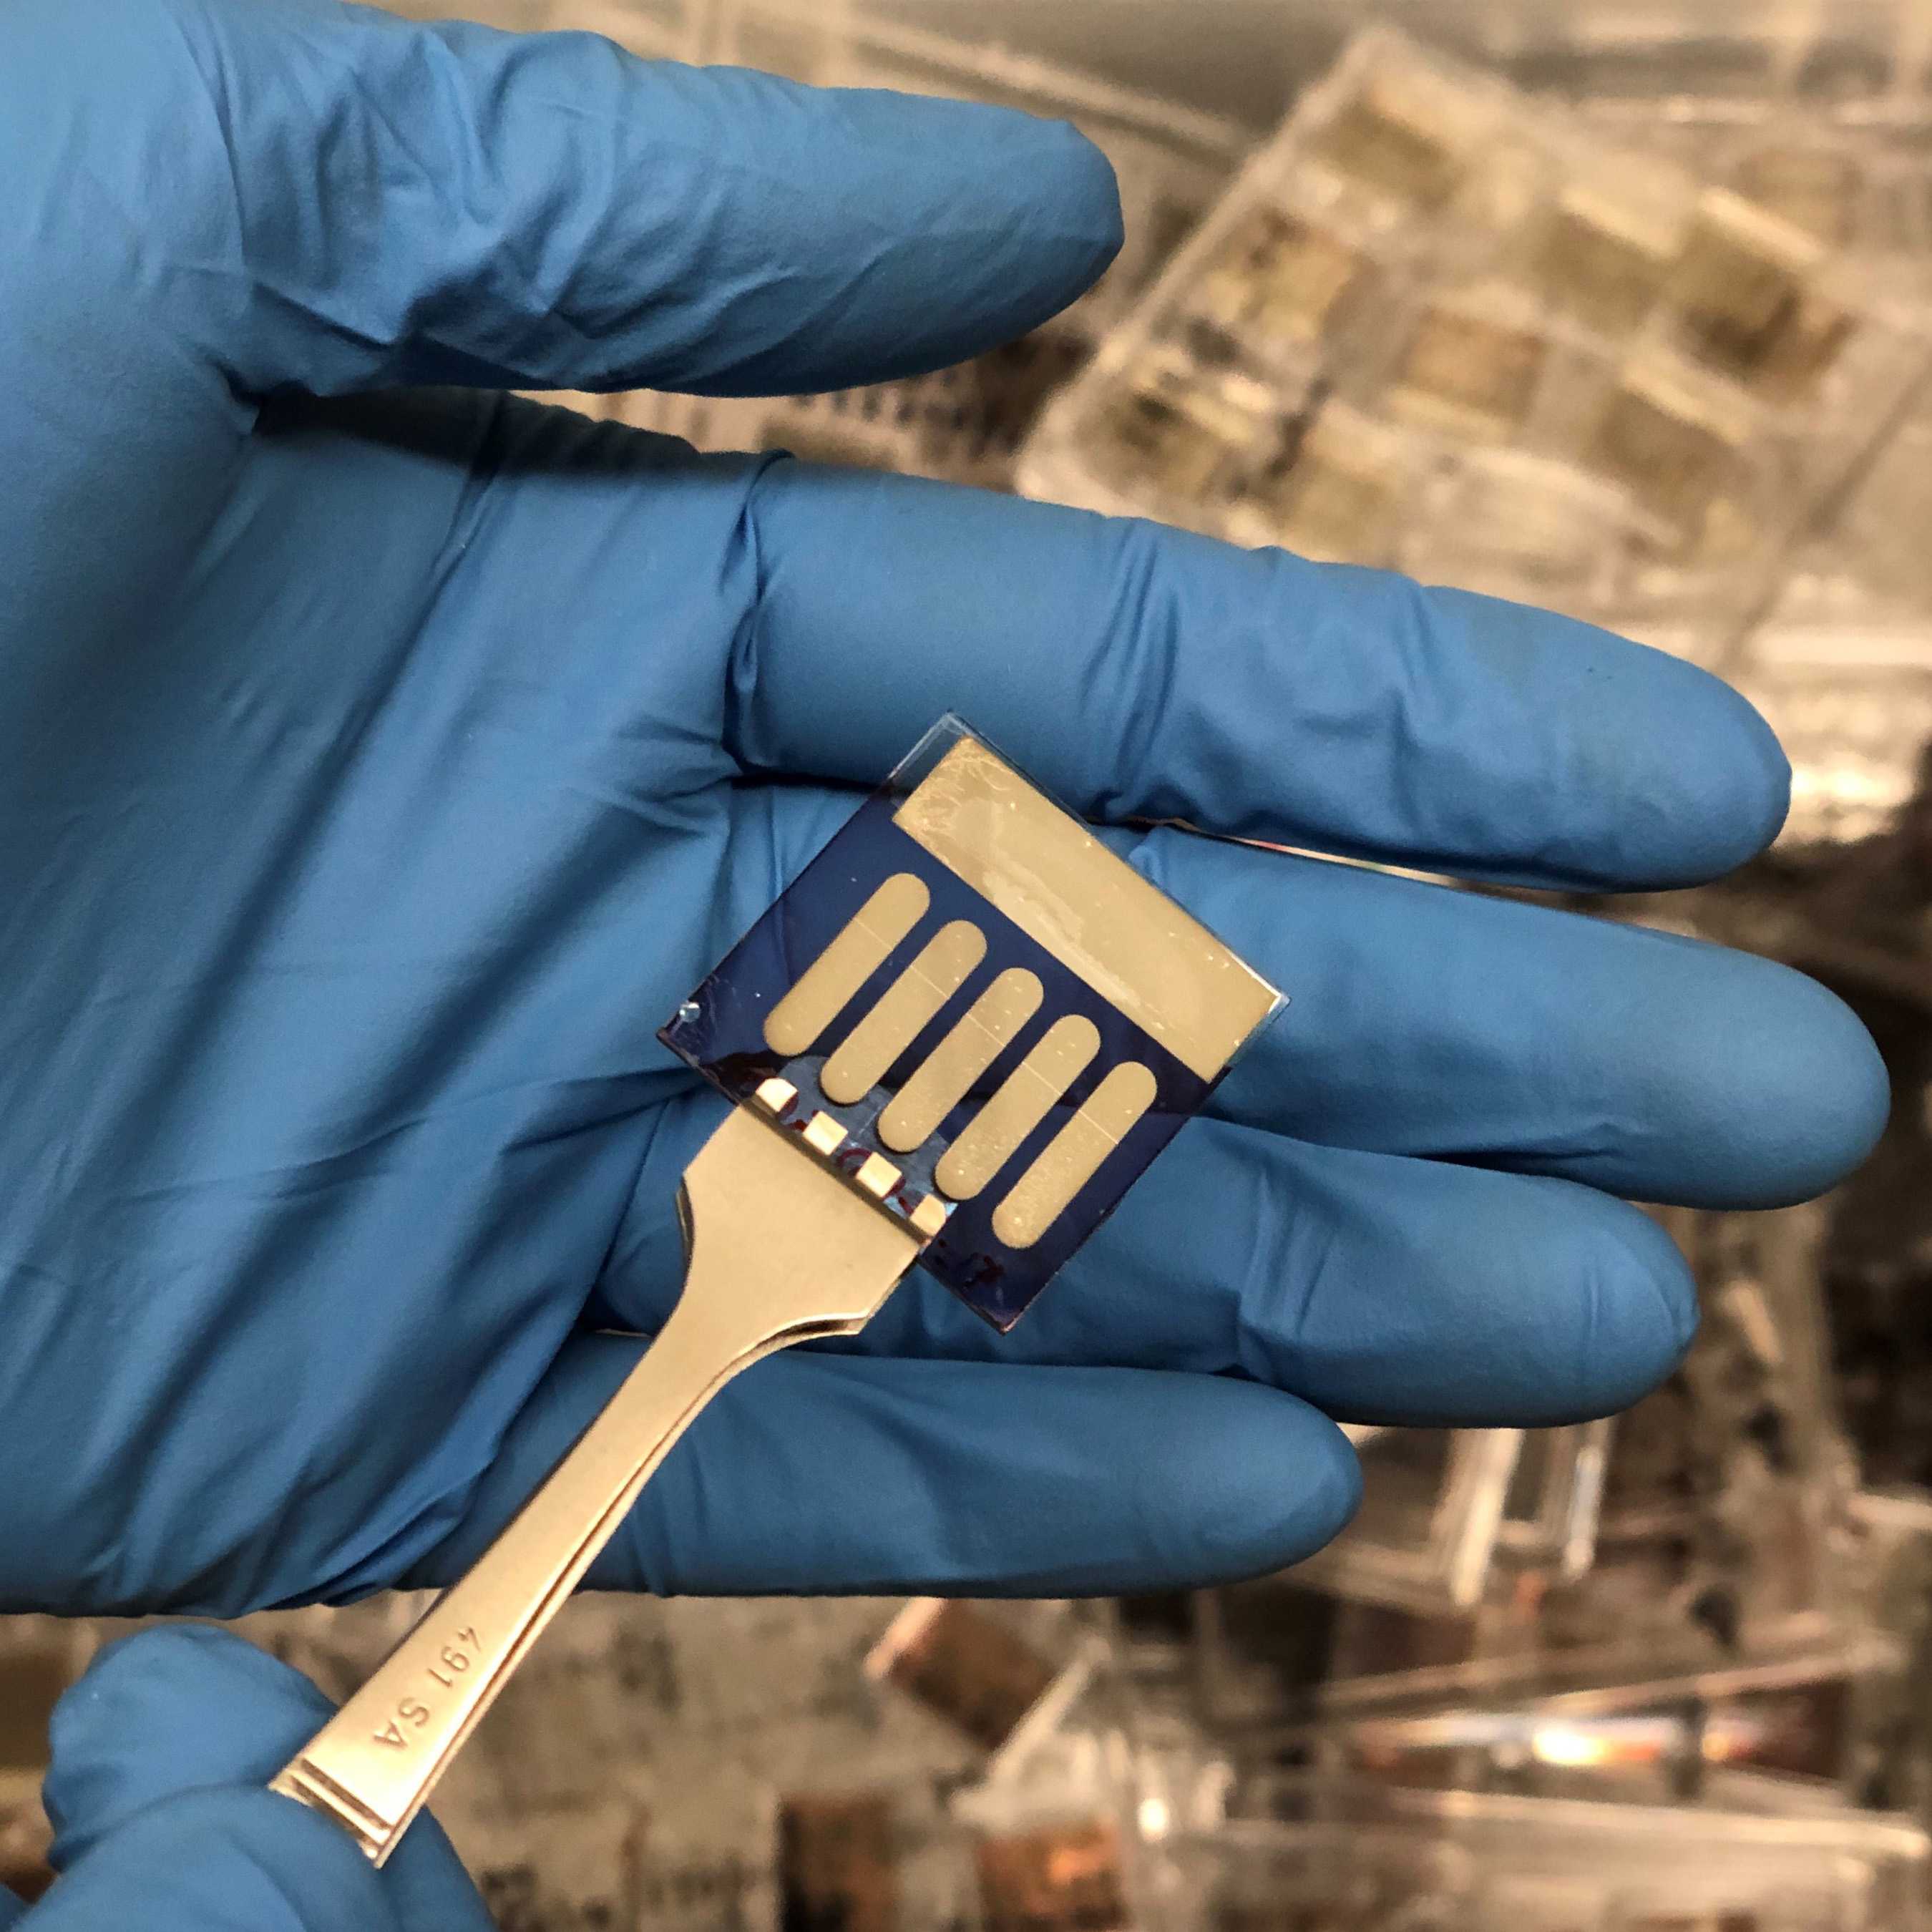 This sample includes five small area organic photovoltaic devices that were fabricated in the Kippelen Research Group at Georgia Tech. Samples with similar geometry were sent to the ISS to investigate the effects of exposure to space environments. (Photo: Bernard Kippelen, Georgia Tech)